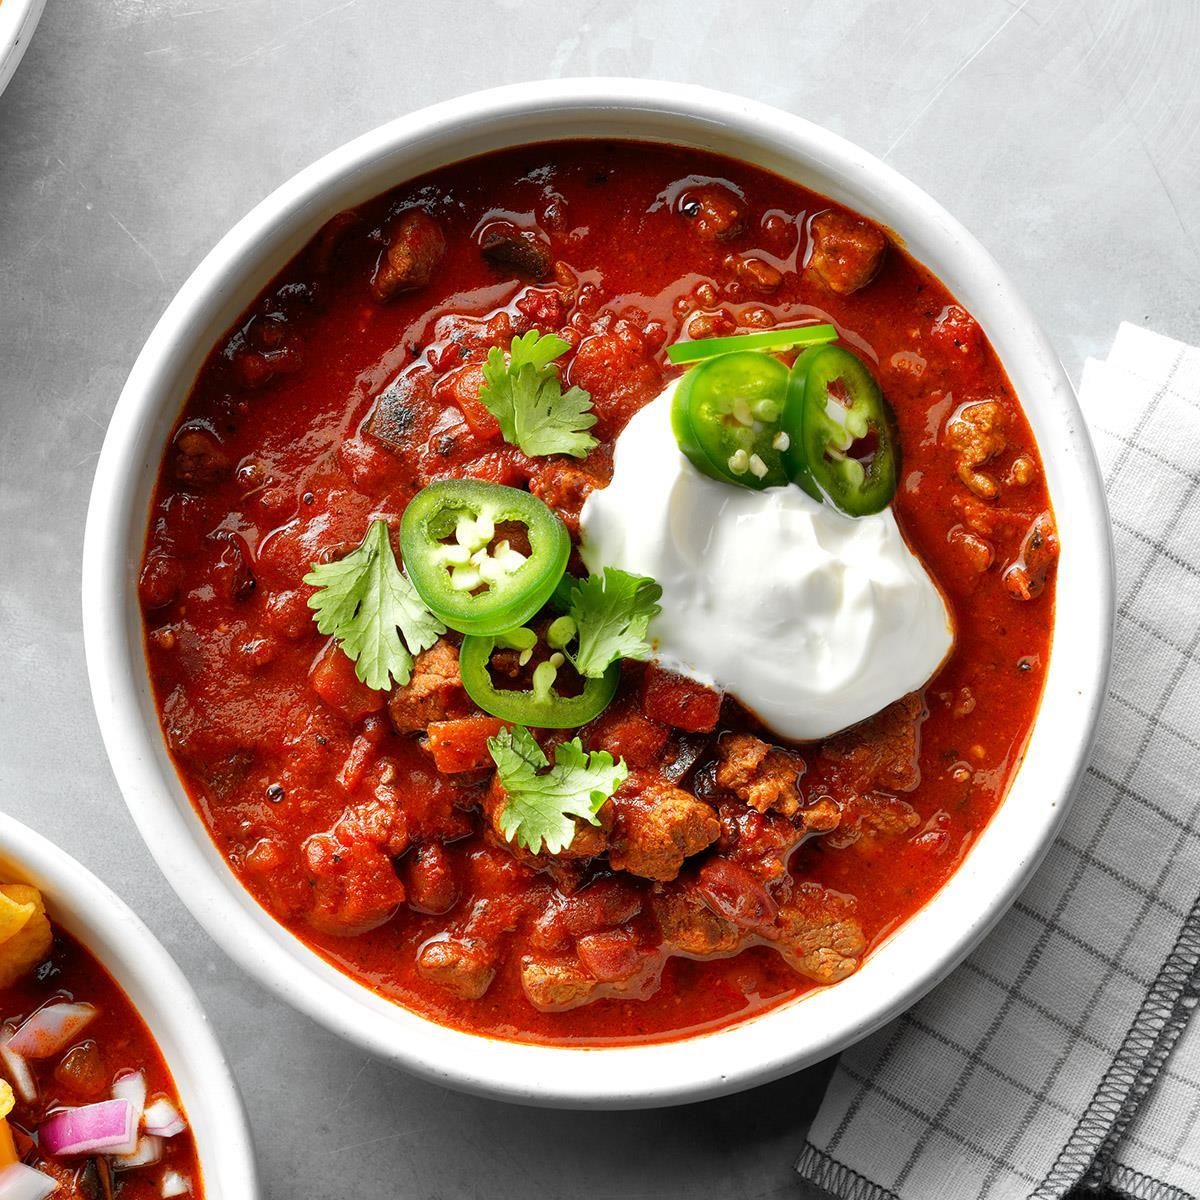 Our Best Chili Recipes of All Time (Plus Video) I Taste of Home